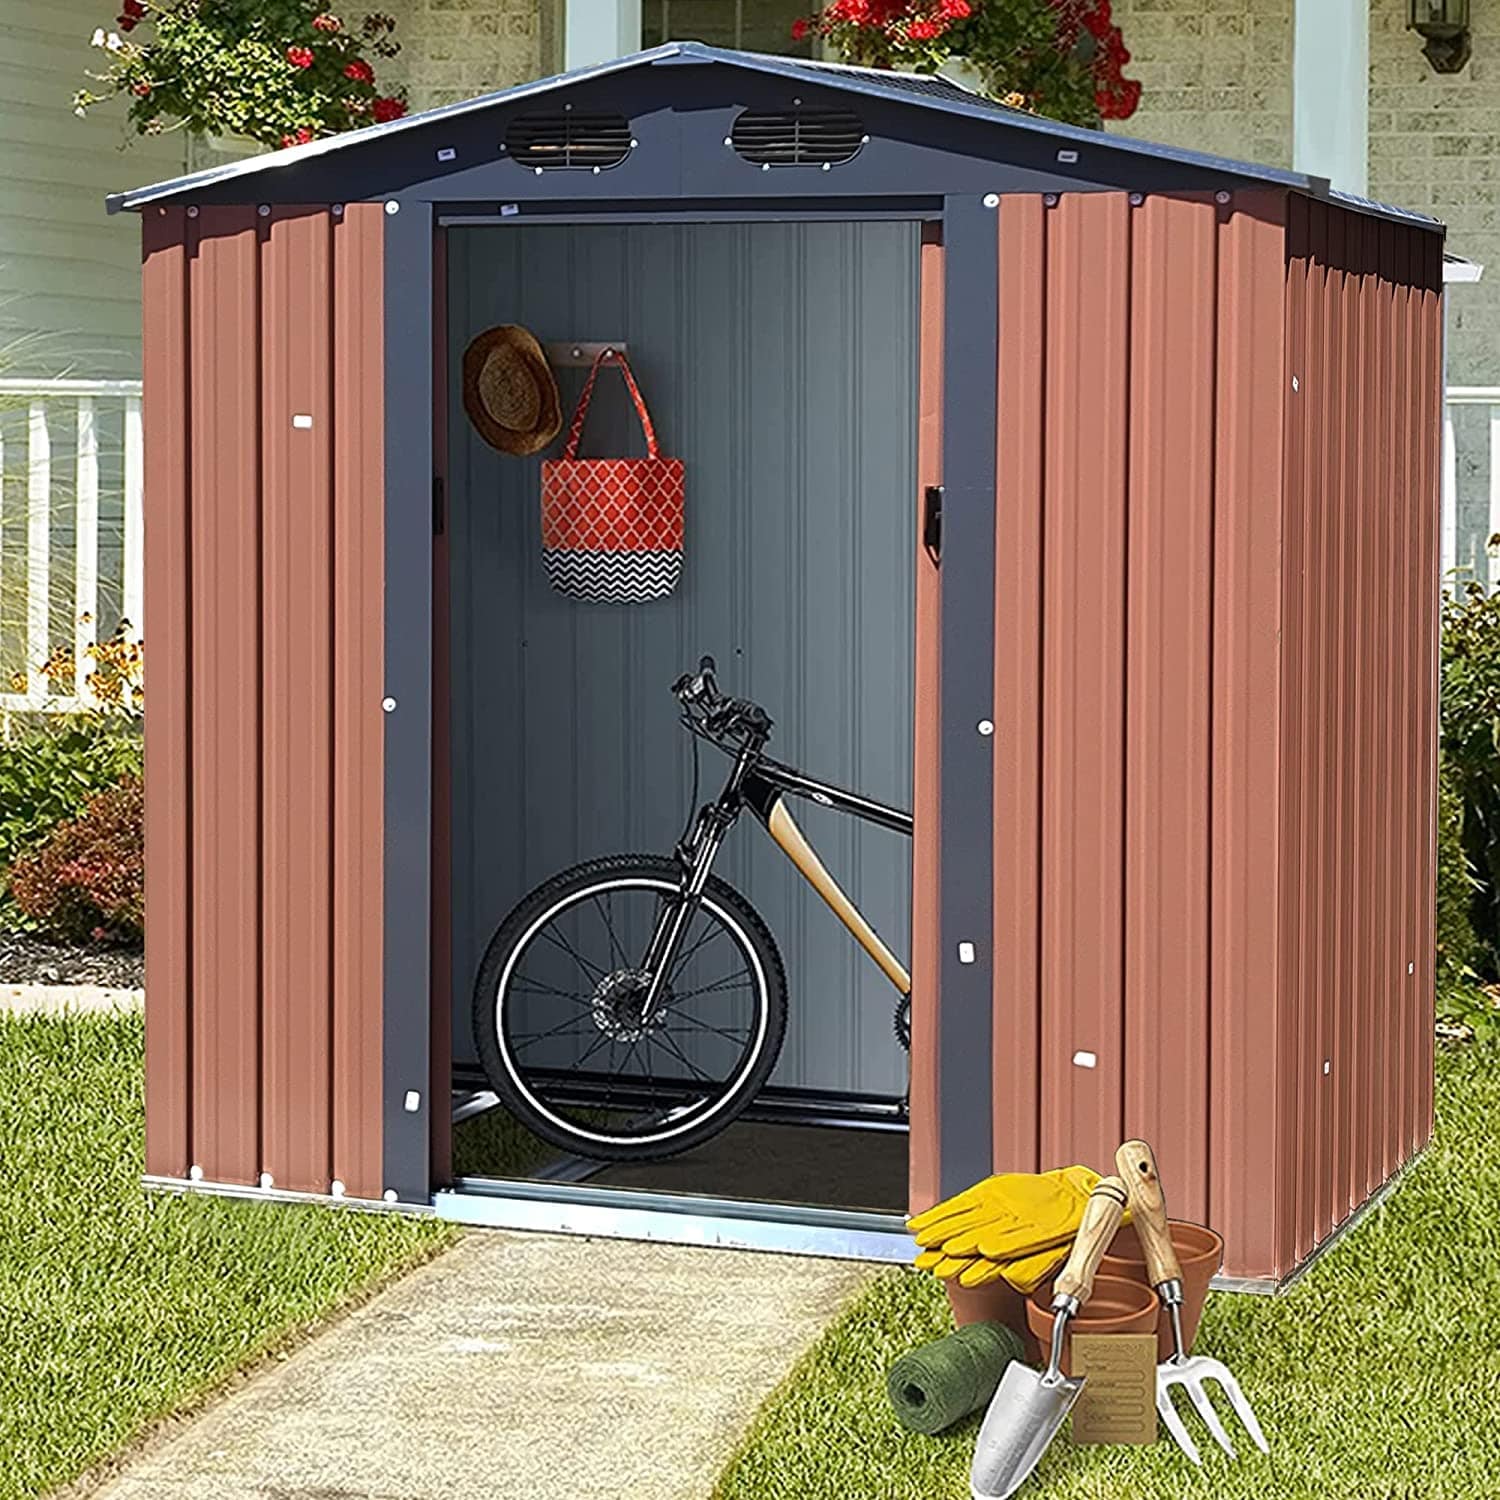 https://ak1.ostkcdn.com/images/products/is/images/direct/c60bf5bd0f53f1a28545b0153de504e9ec9f4fe1/Storage-Sheds-Outdoor-Storage-Shed-Clearance.jpg